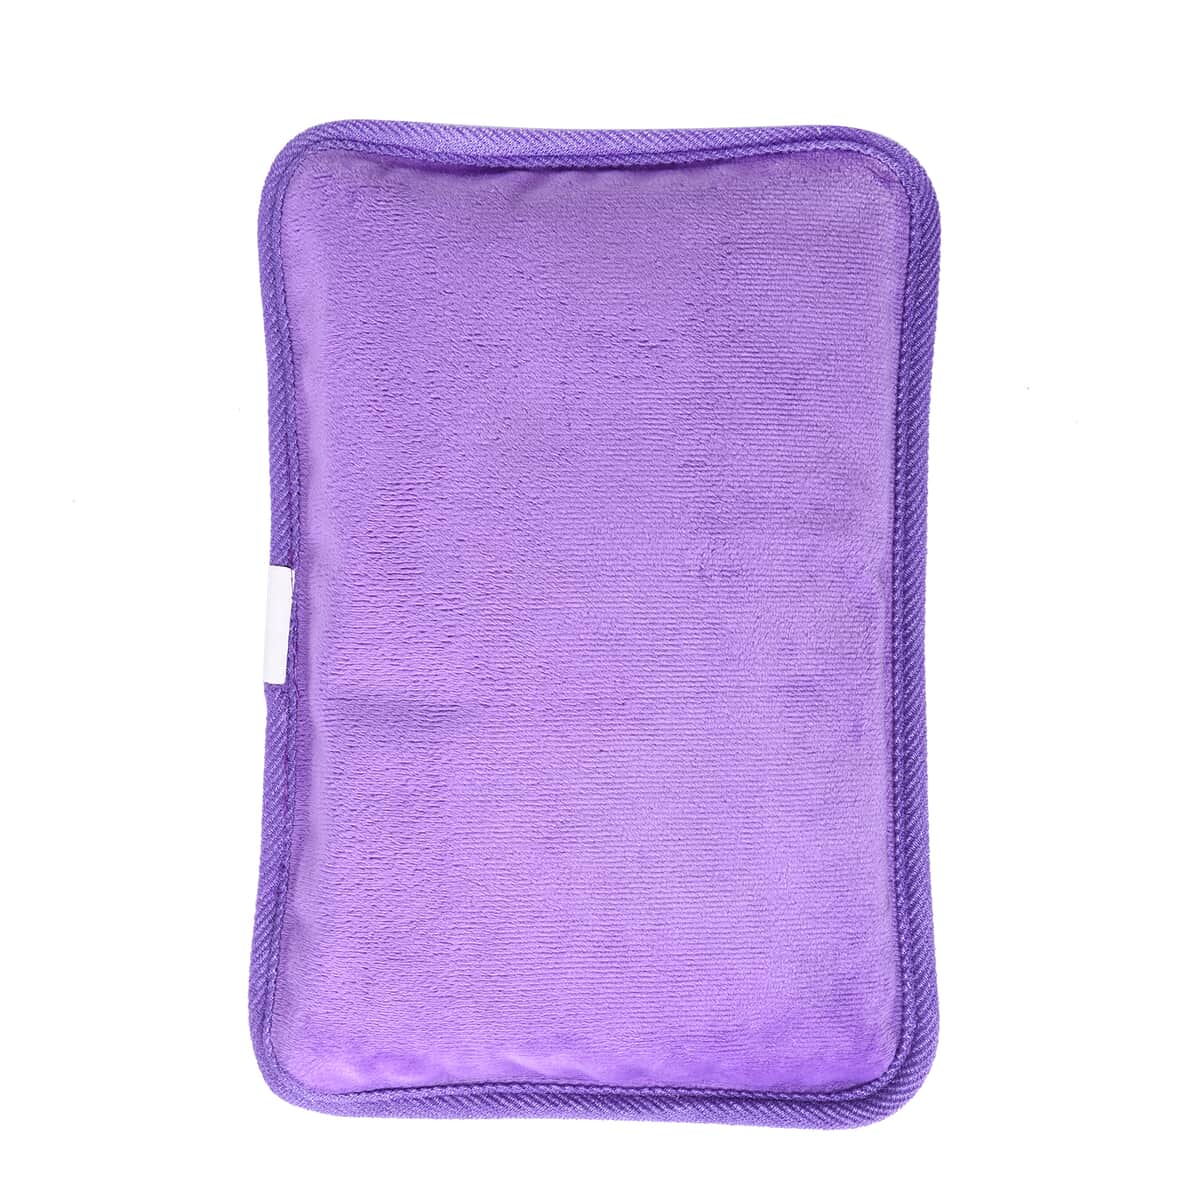 HOMESMART Rechargeable Hand Warmer Pillow Heating Bag Electric Hot Water Bottle -Purple image number 4